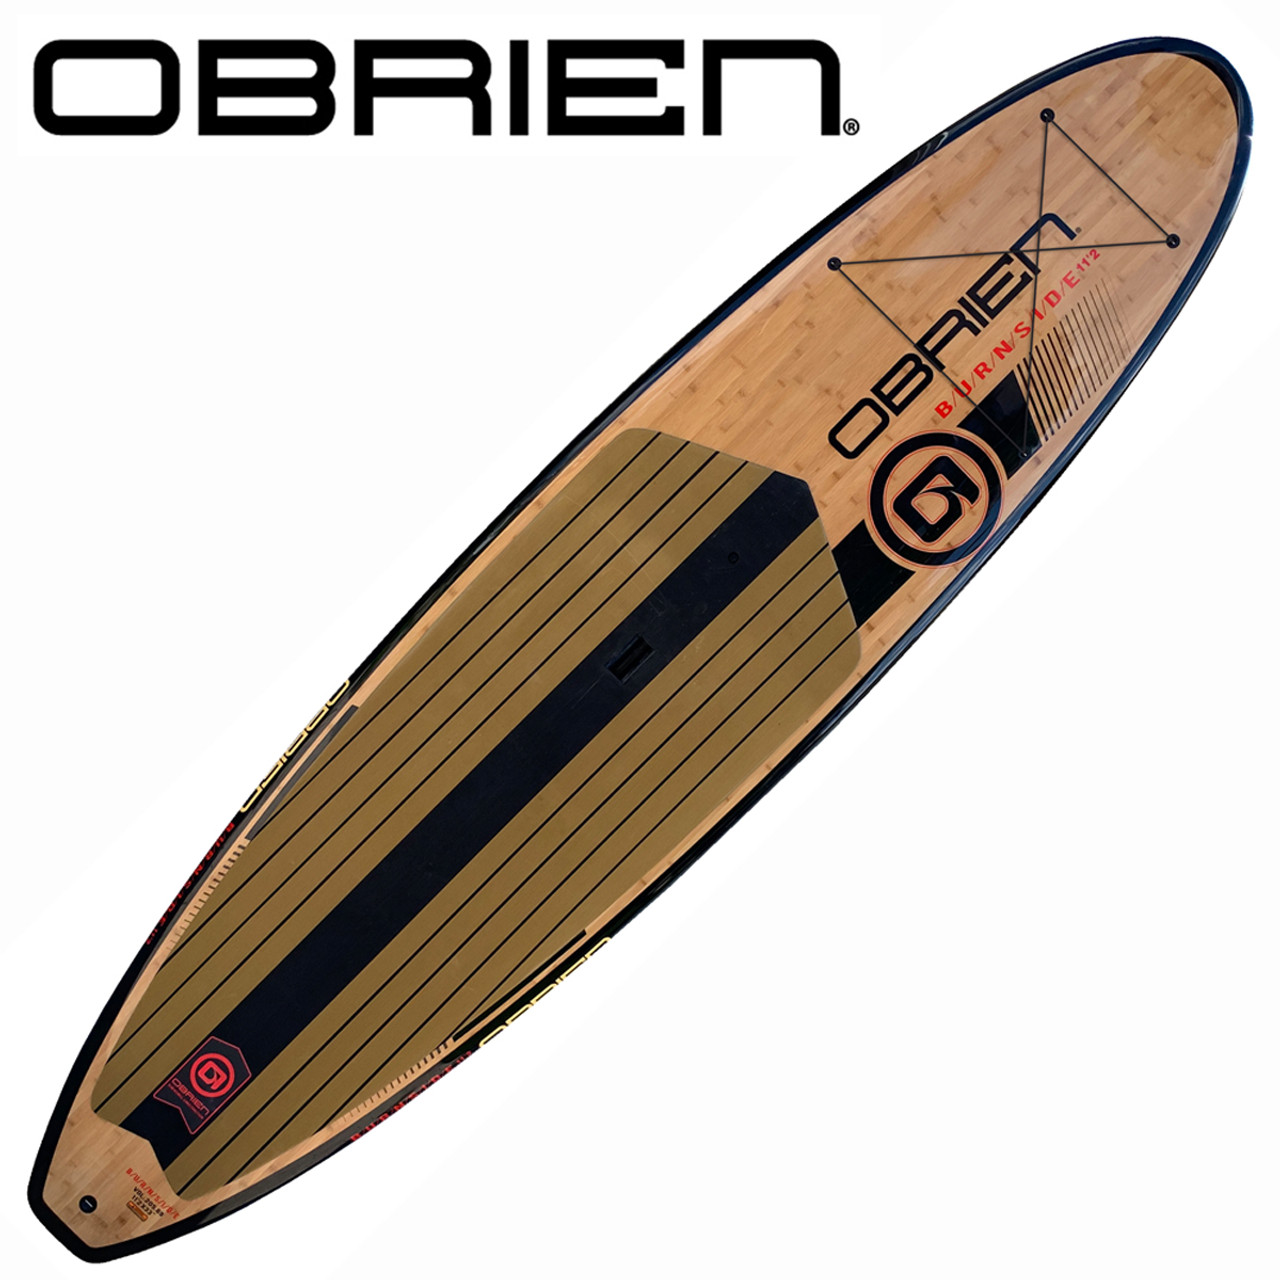 O'Brien Burnside 10'6" Stand Up Paddleboard with Adjustable Paddle